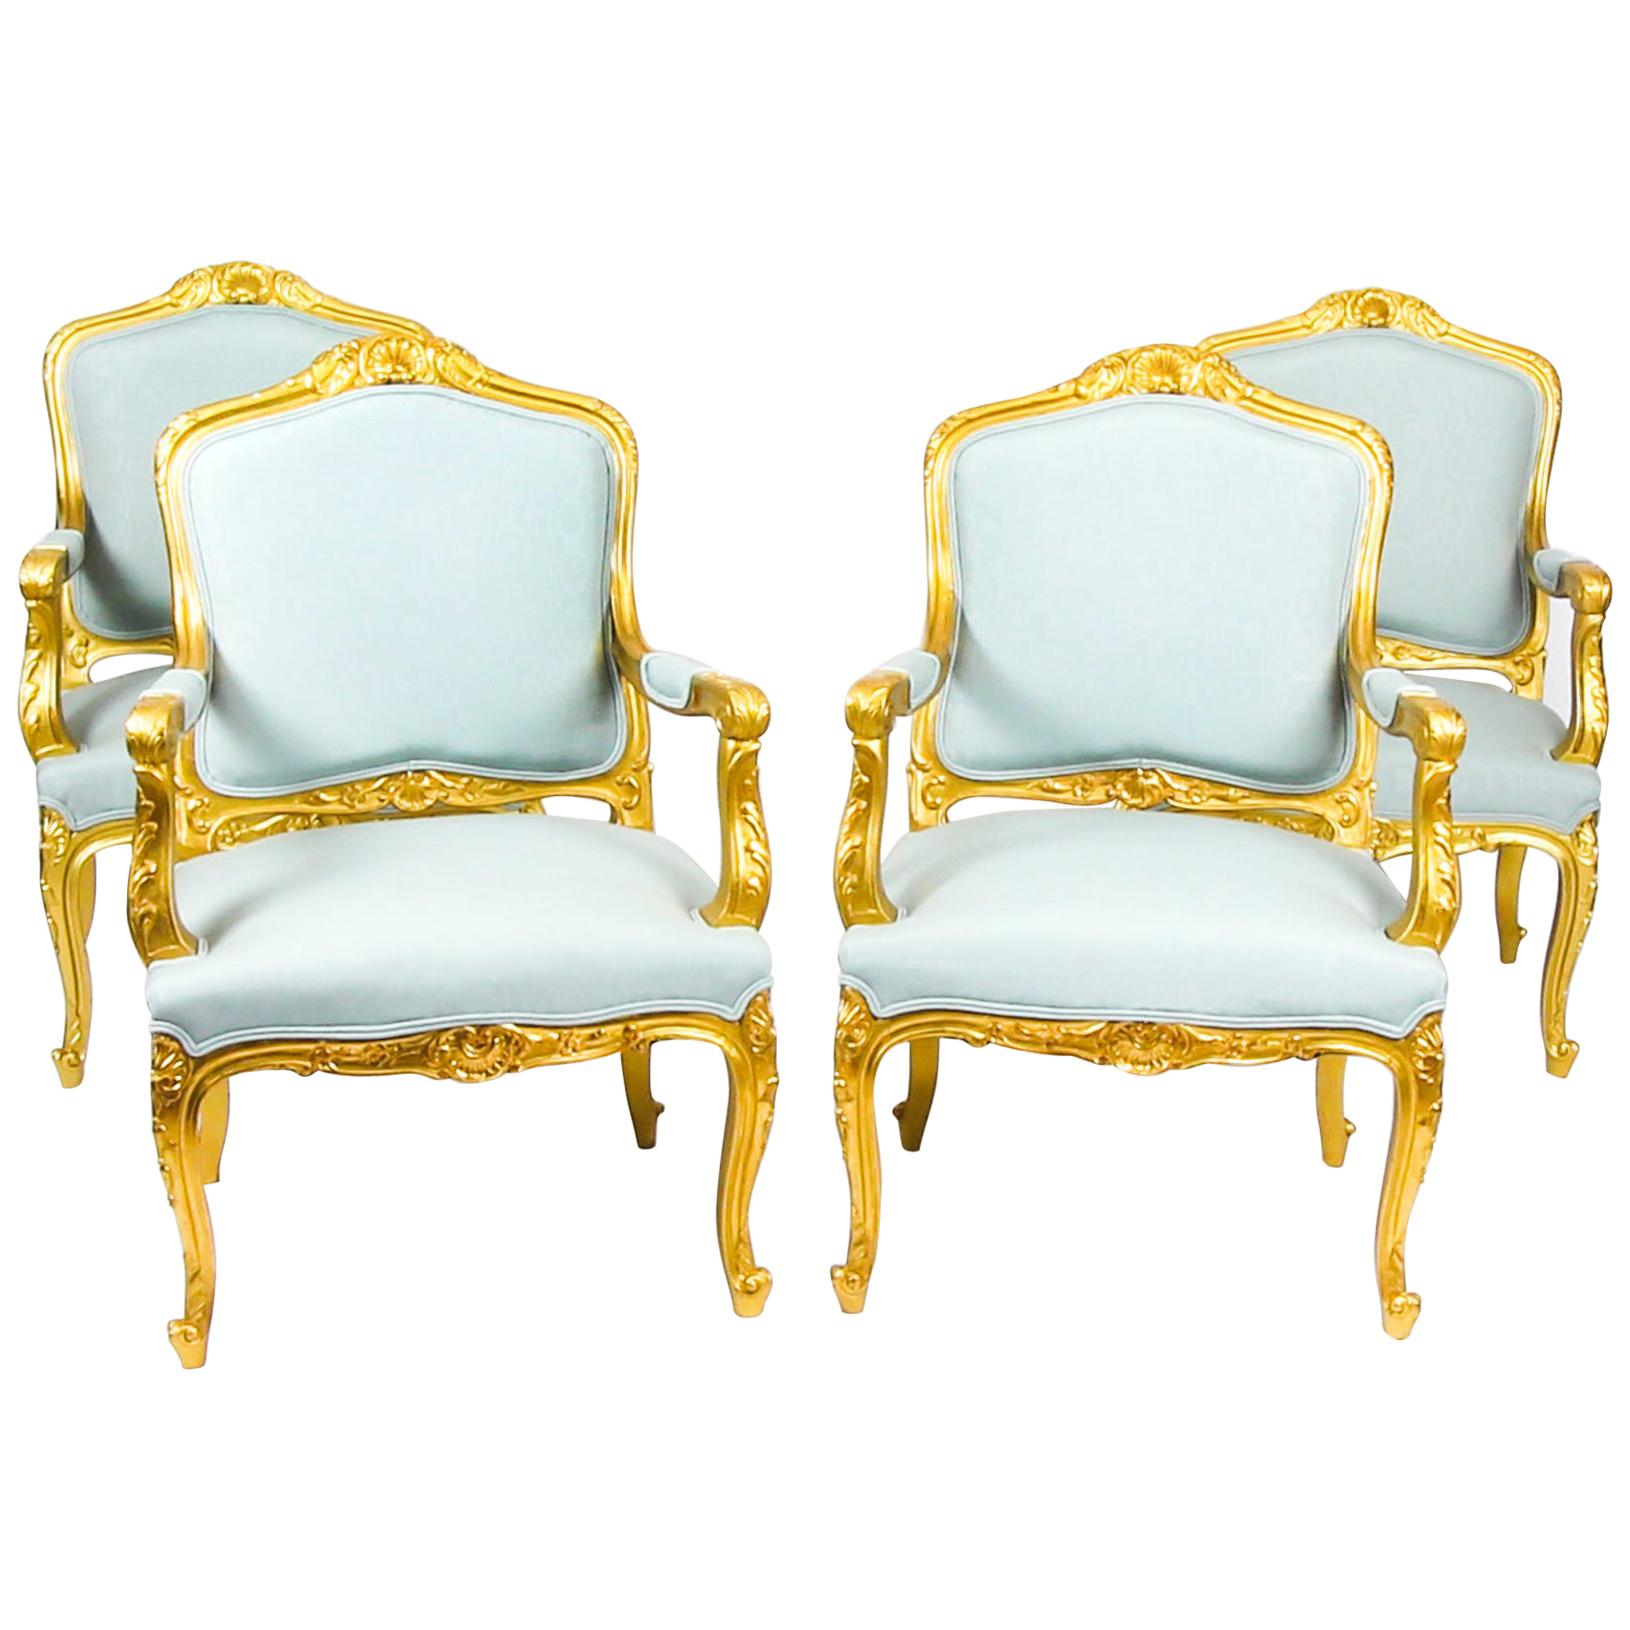 Antique Set of 4 Louis Revival French Giltwood Armchairs, 19th Century